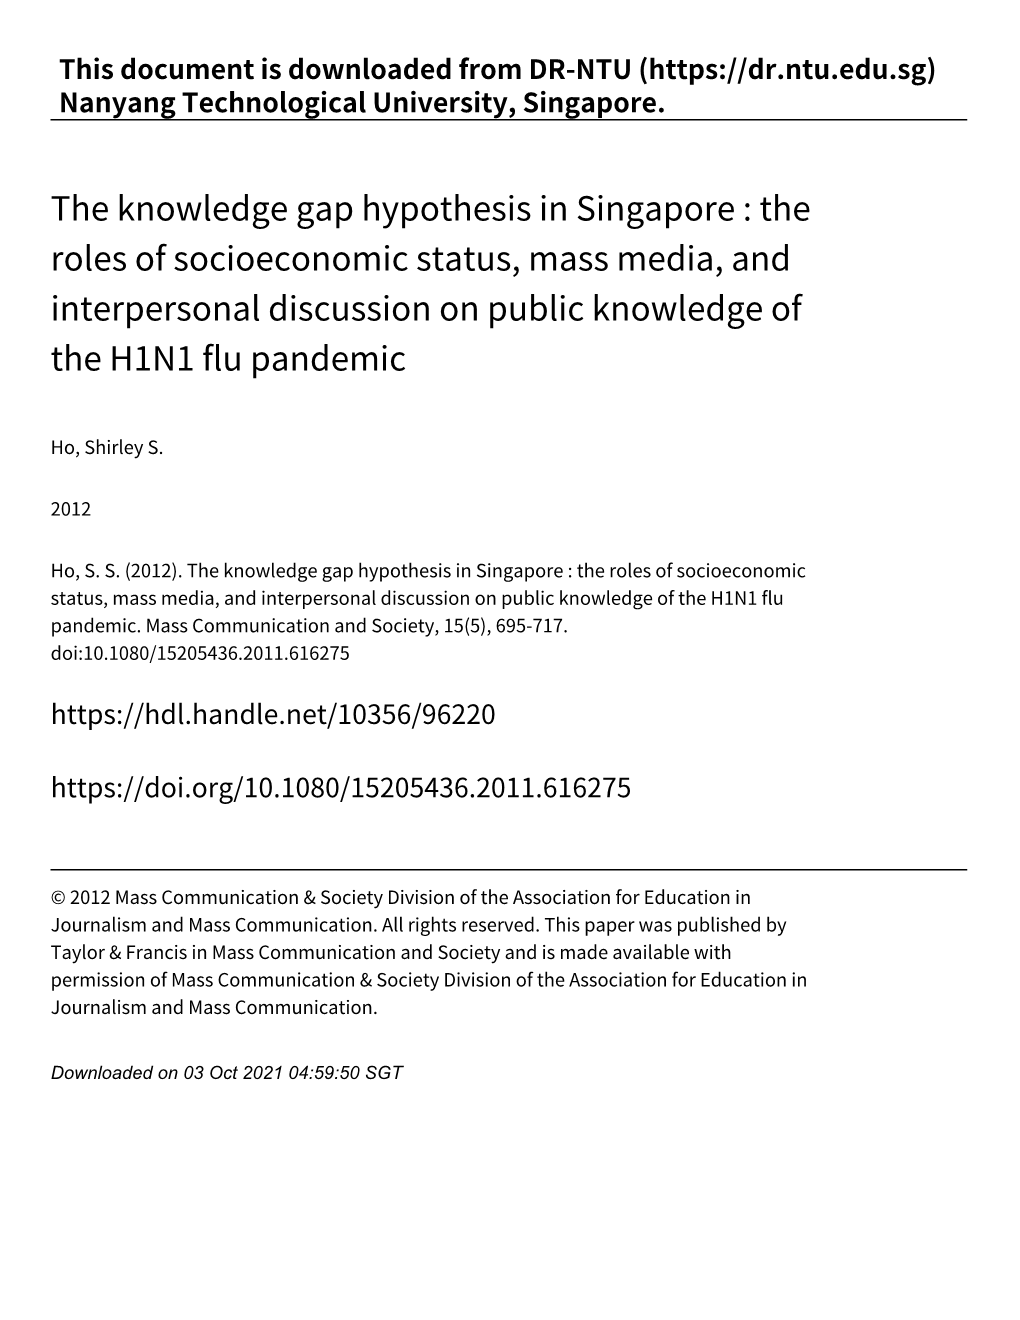 The Knowledge Gap Hypothesis in Singapore : the Roles of Socioeconomic Status, Mass Media, and Interpersonal Discussion on Public Knowledge of the H1N1 Flu Pandemic